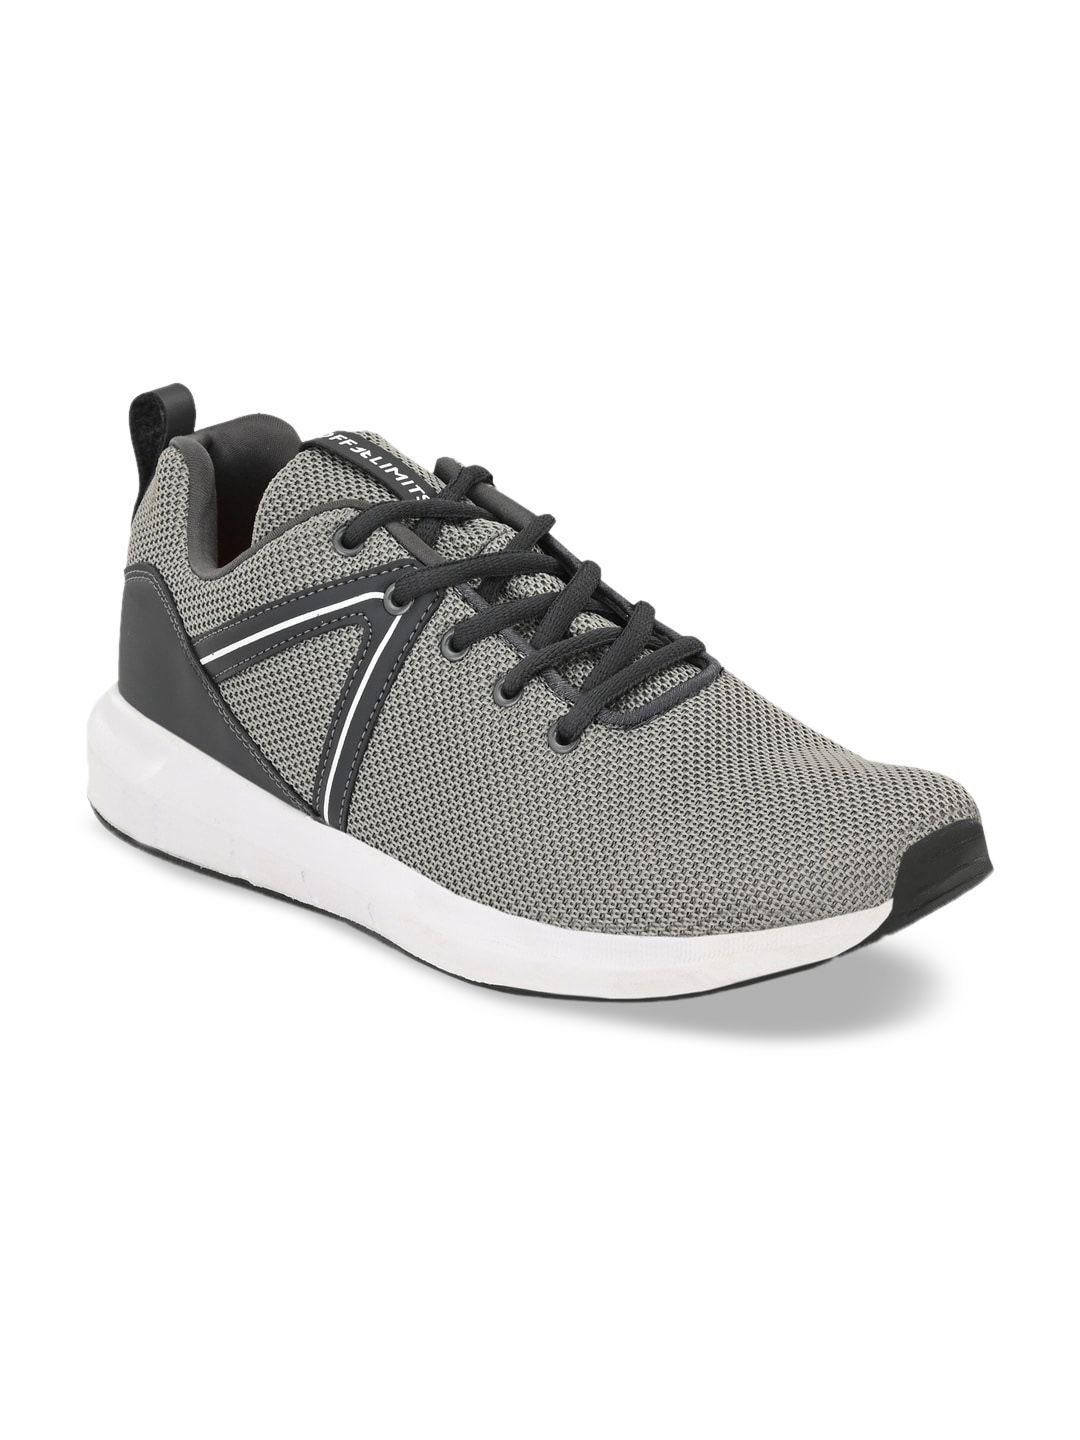 off-limits-men-grey-running-sports-shoes